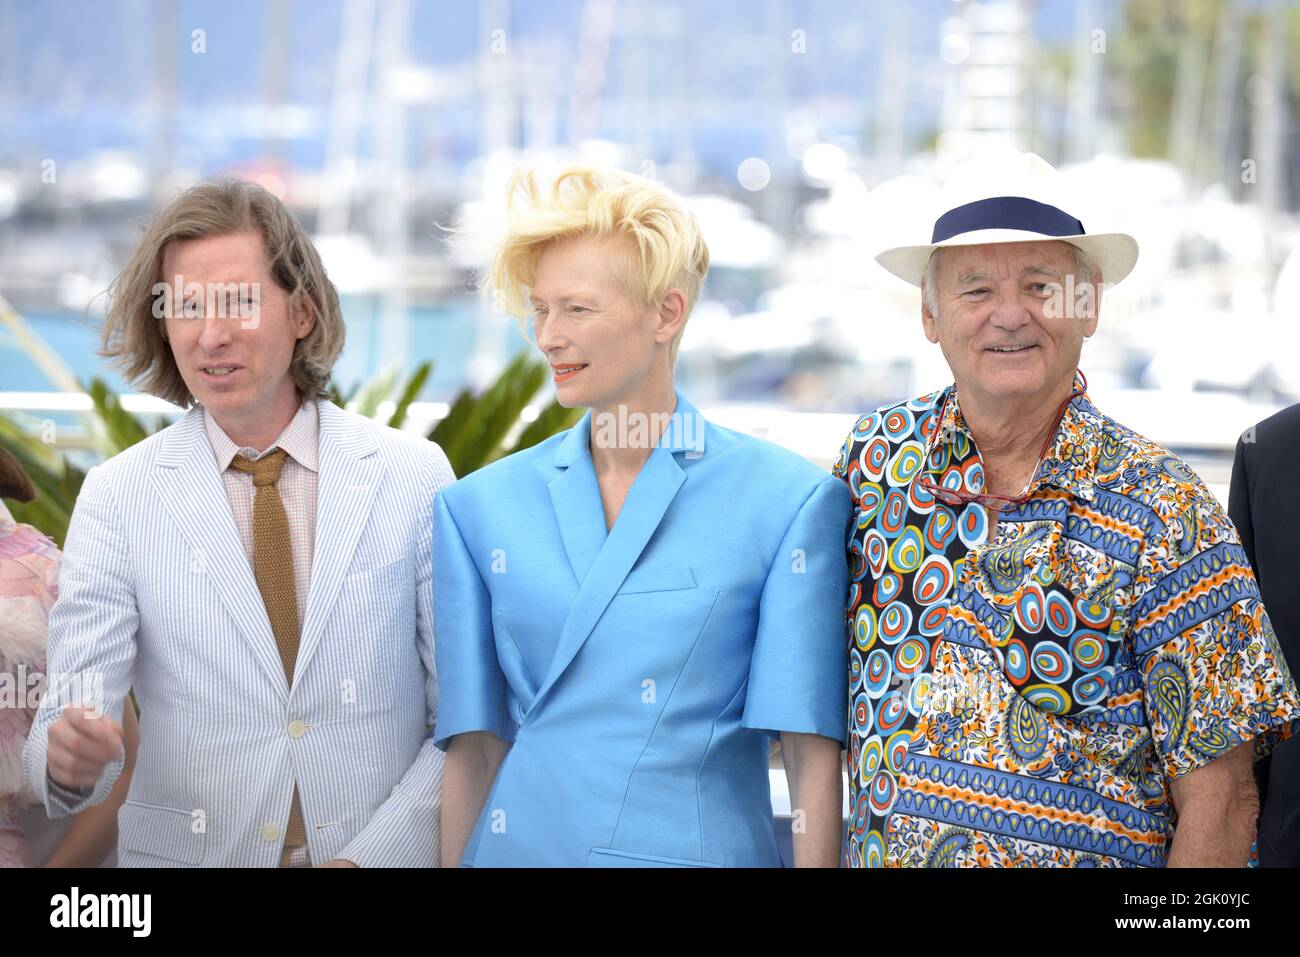 The French Dispatch photocall at the 74th Cannes Film Festival 2021 Stock Photo